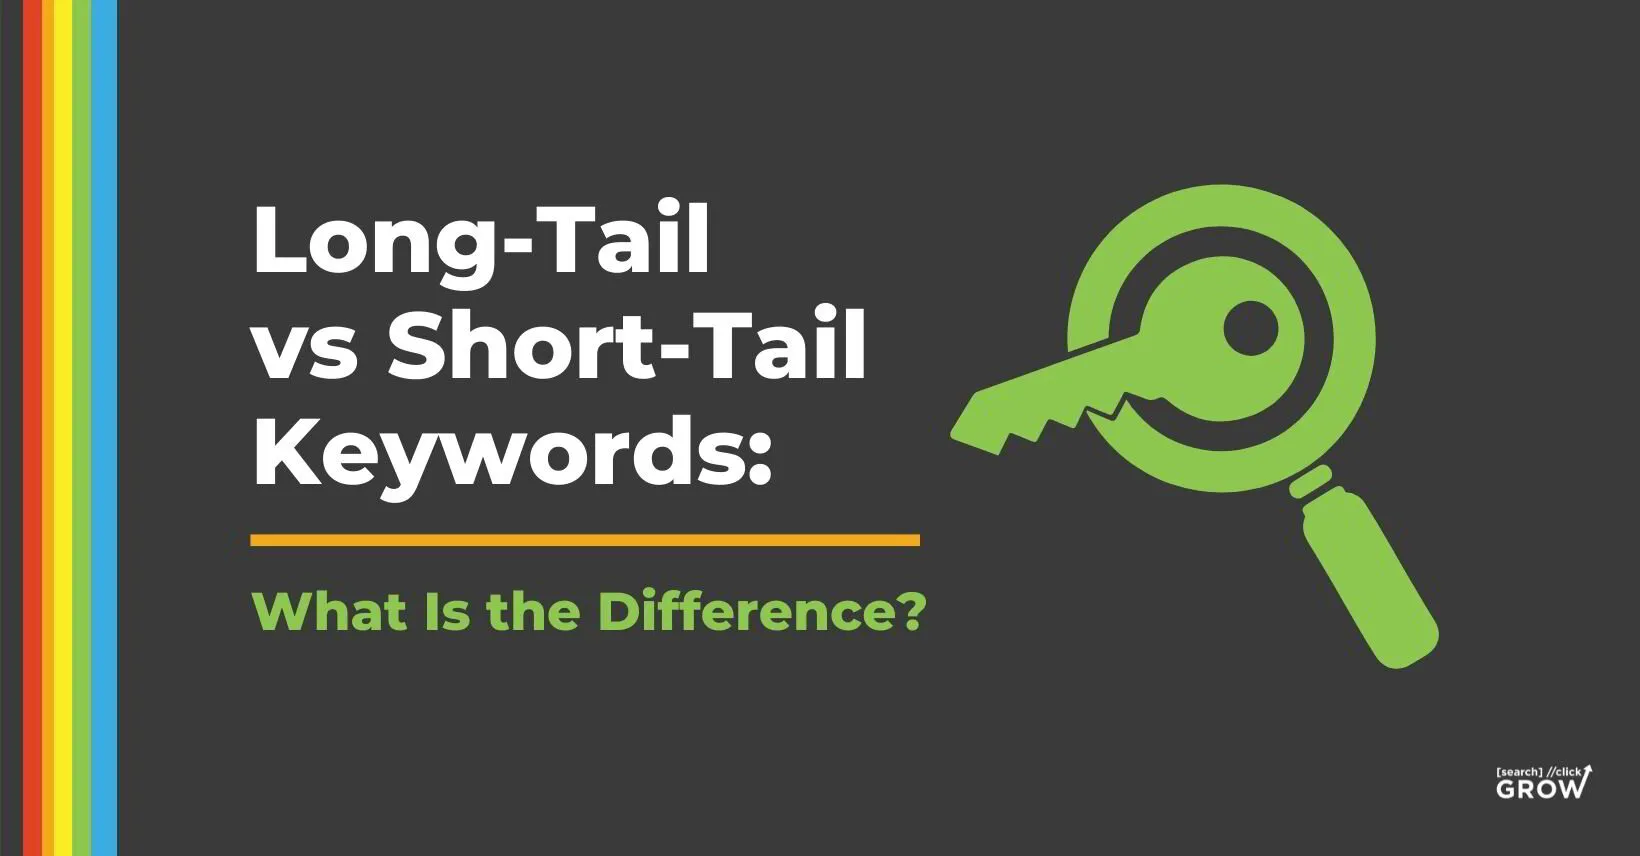 Long-Tail vs Short-Tail Keywords: What Is the Difference?